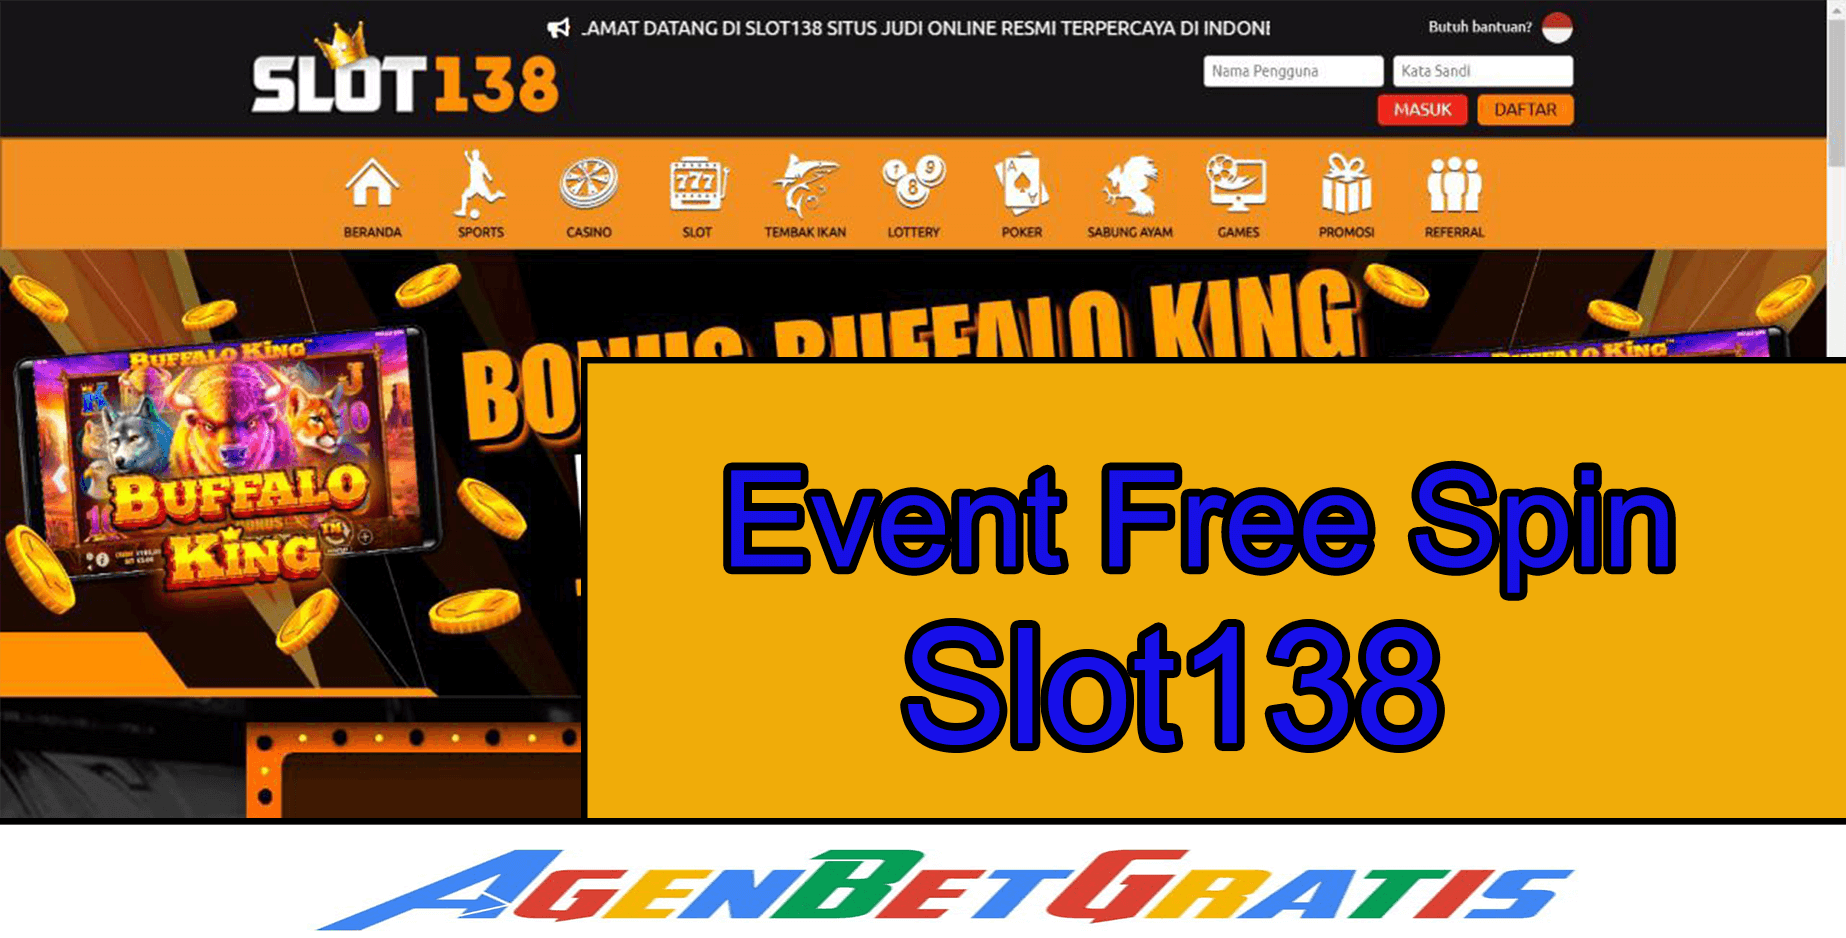 SLOT138 - Event Free Spin